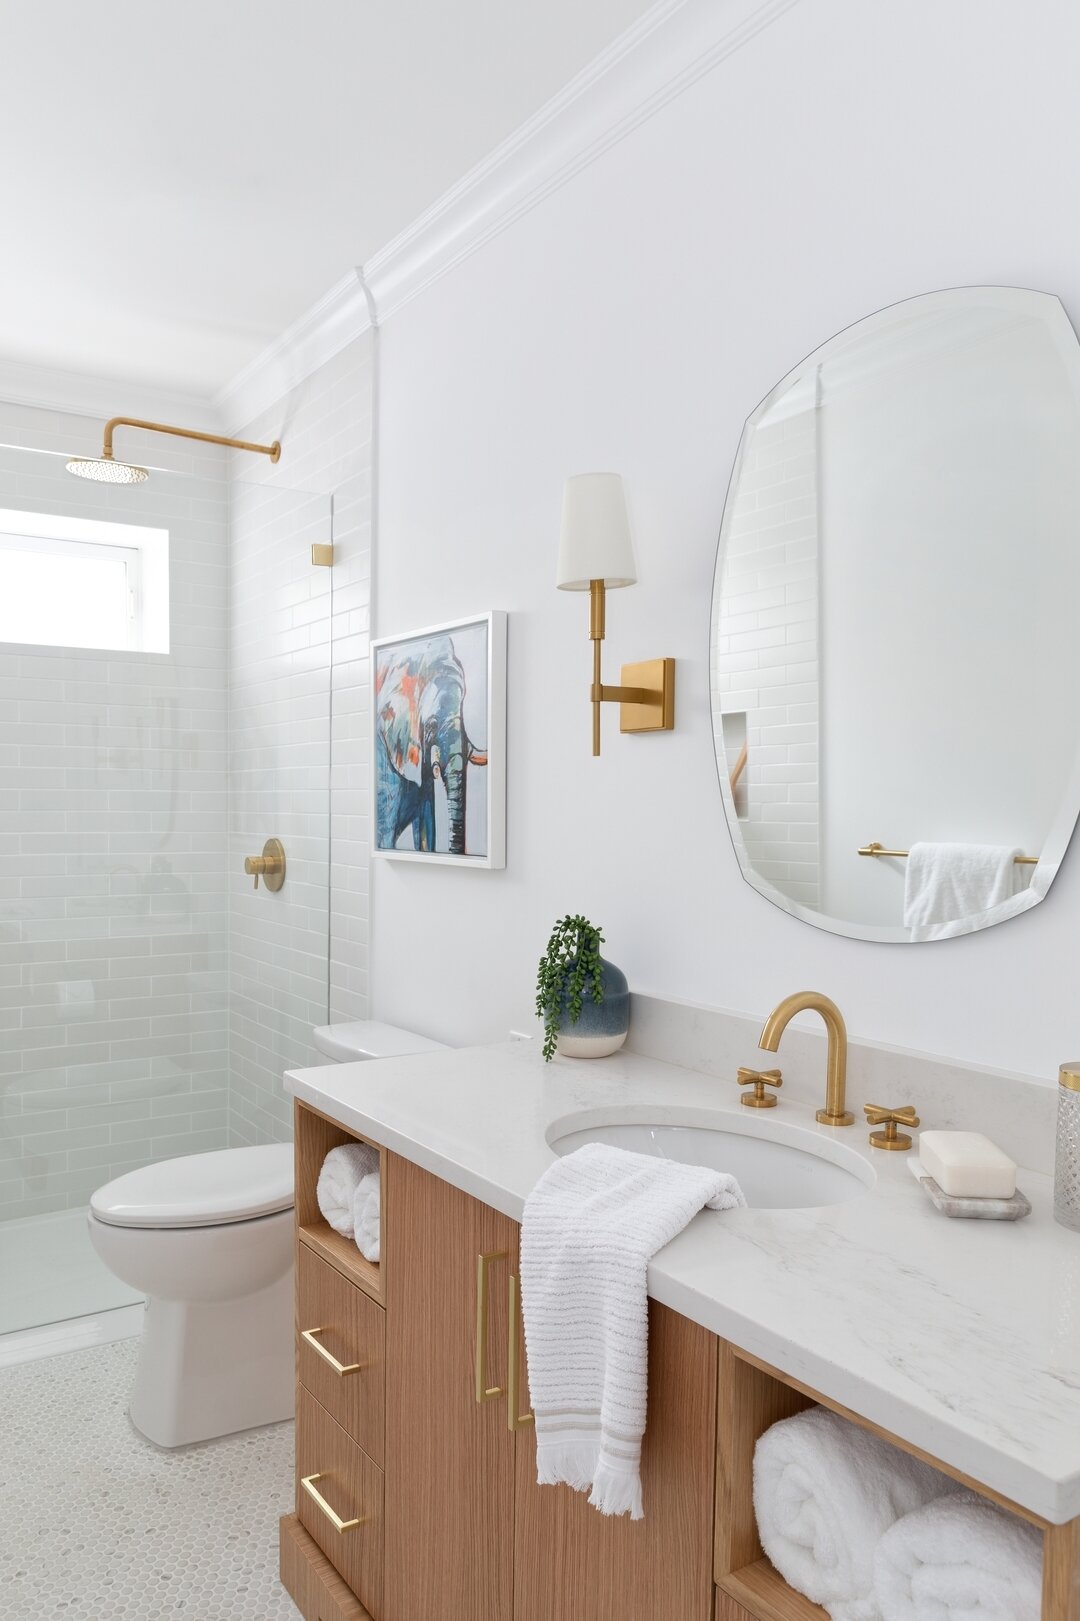 How to achieve a fresh + timeless bathroom refresh 👇🏻

&lt; Keep the colour palette simple
&lt; Play with scale and textures
&lt; Choose metal tones like polished nickel or gold to reflect the light
&lt; Select classic shapes like penny rounds and 